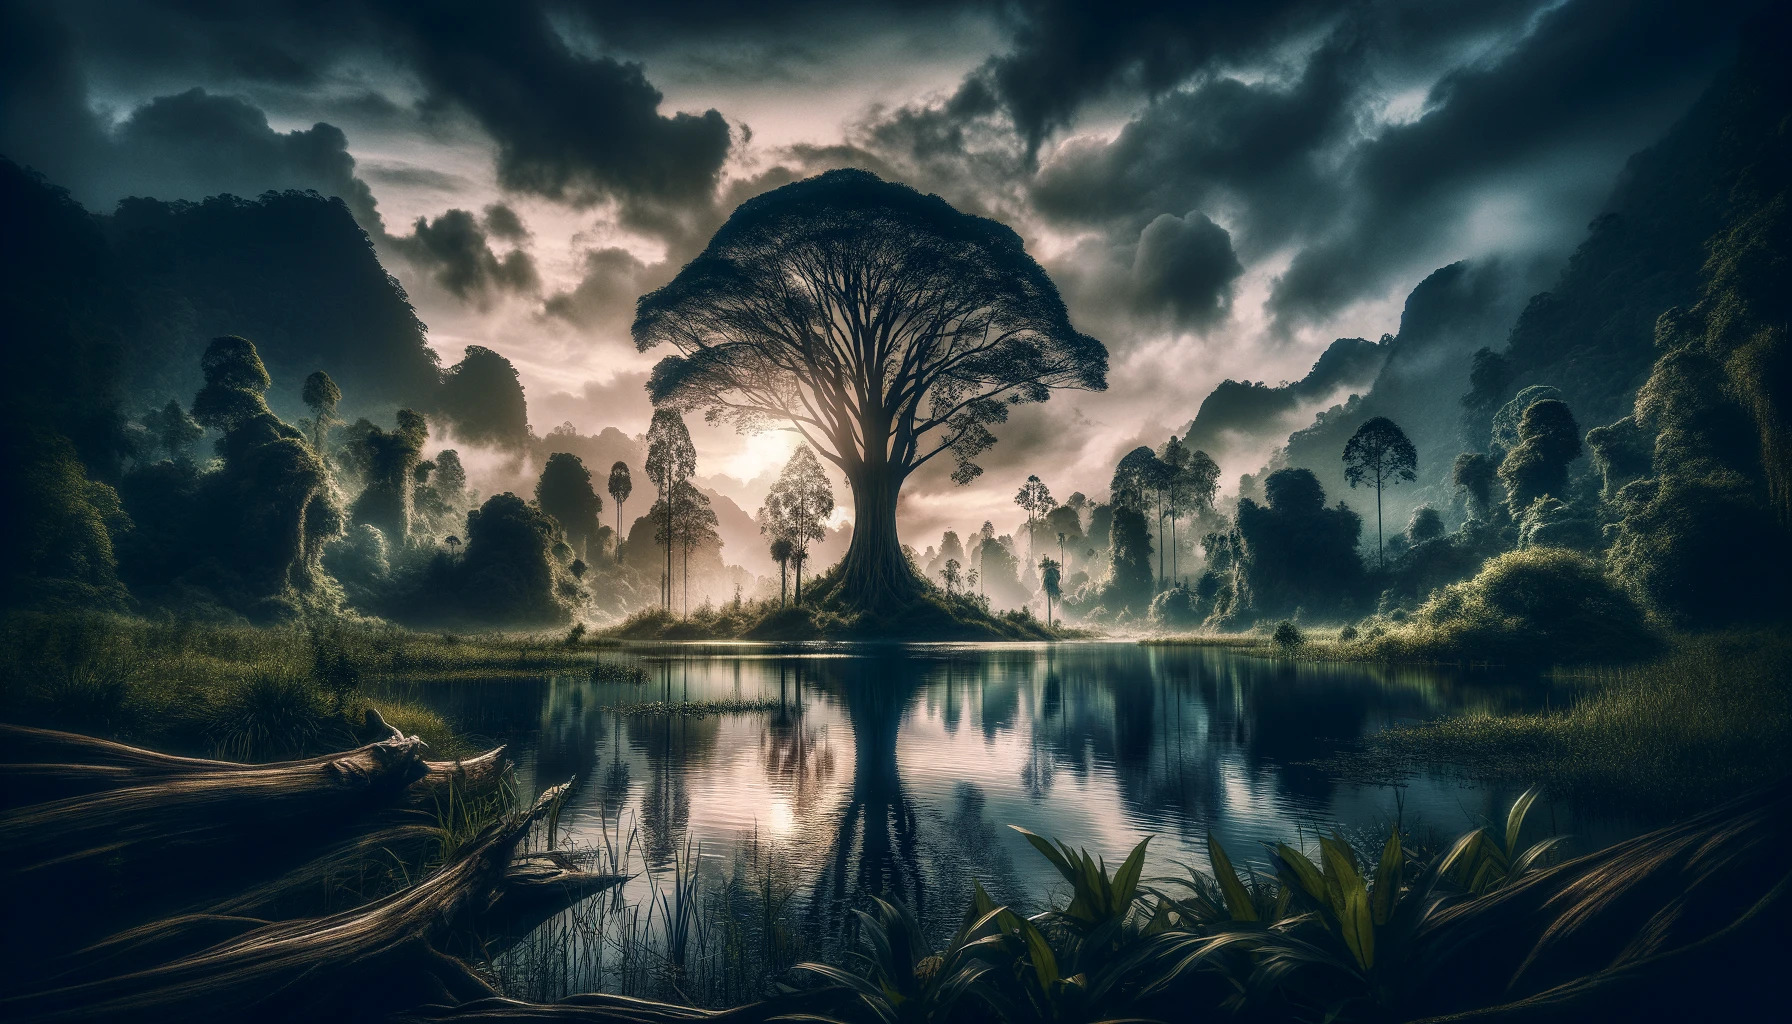 the cinematic image inspired by words that start with 'T'. The scene captures a towering tree by a tranquil lake, surrounded by a thicket in a twilight setting. This composition aims to evoke a sense of serenity and grandeur.